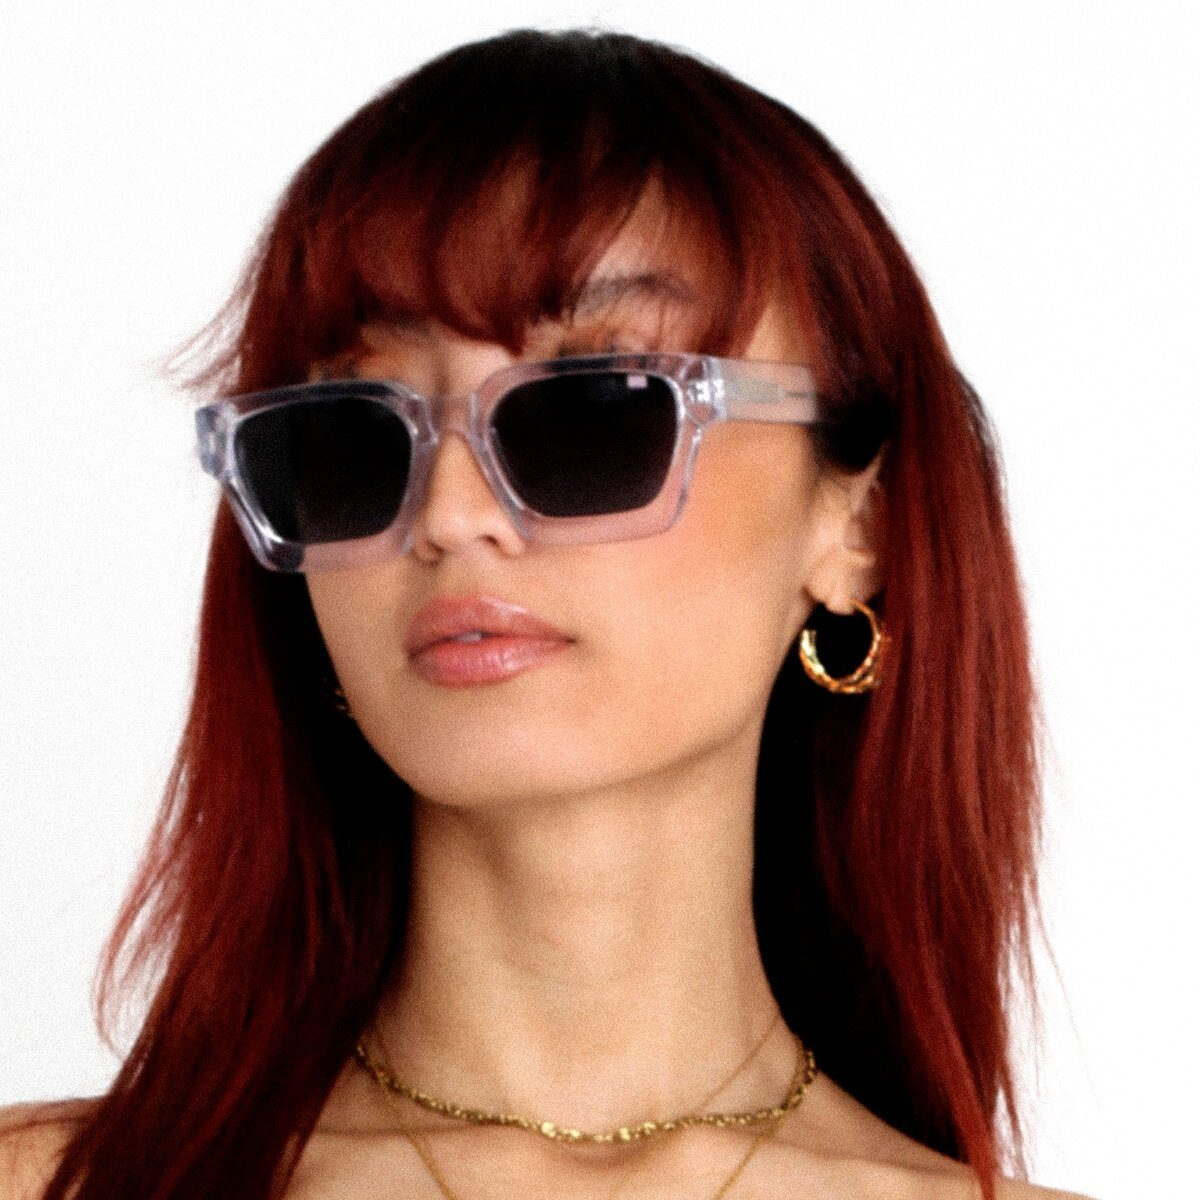 Rebel Transparent Luxury Square Sunglasses: Bold & Sustainable with 100% UV Protection - LUNAR